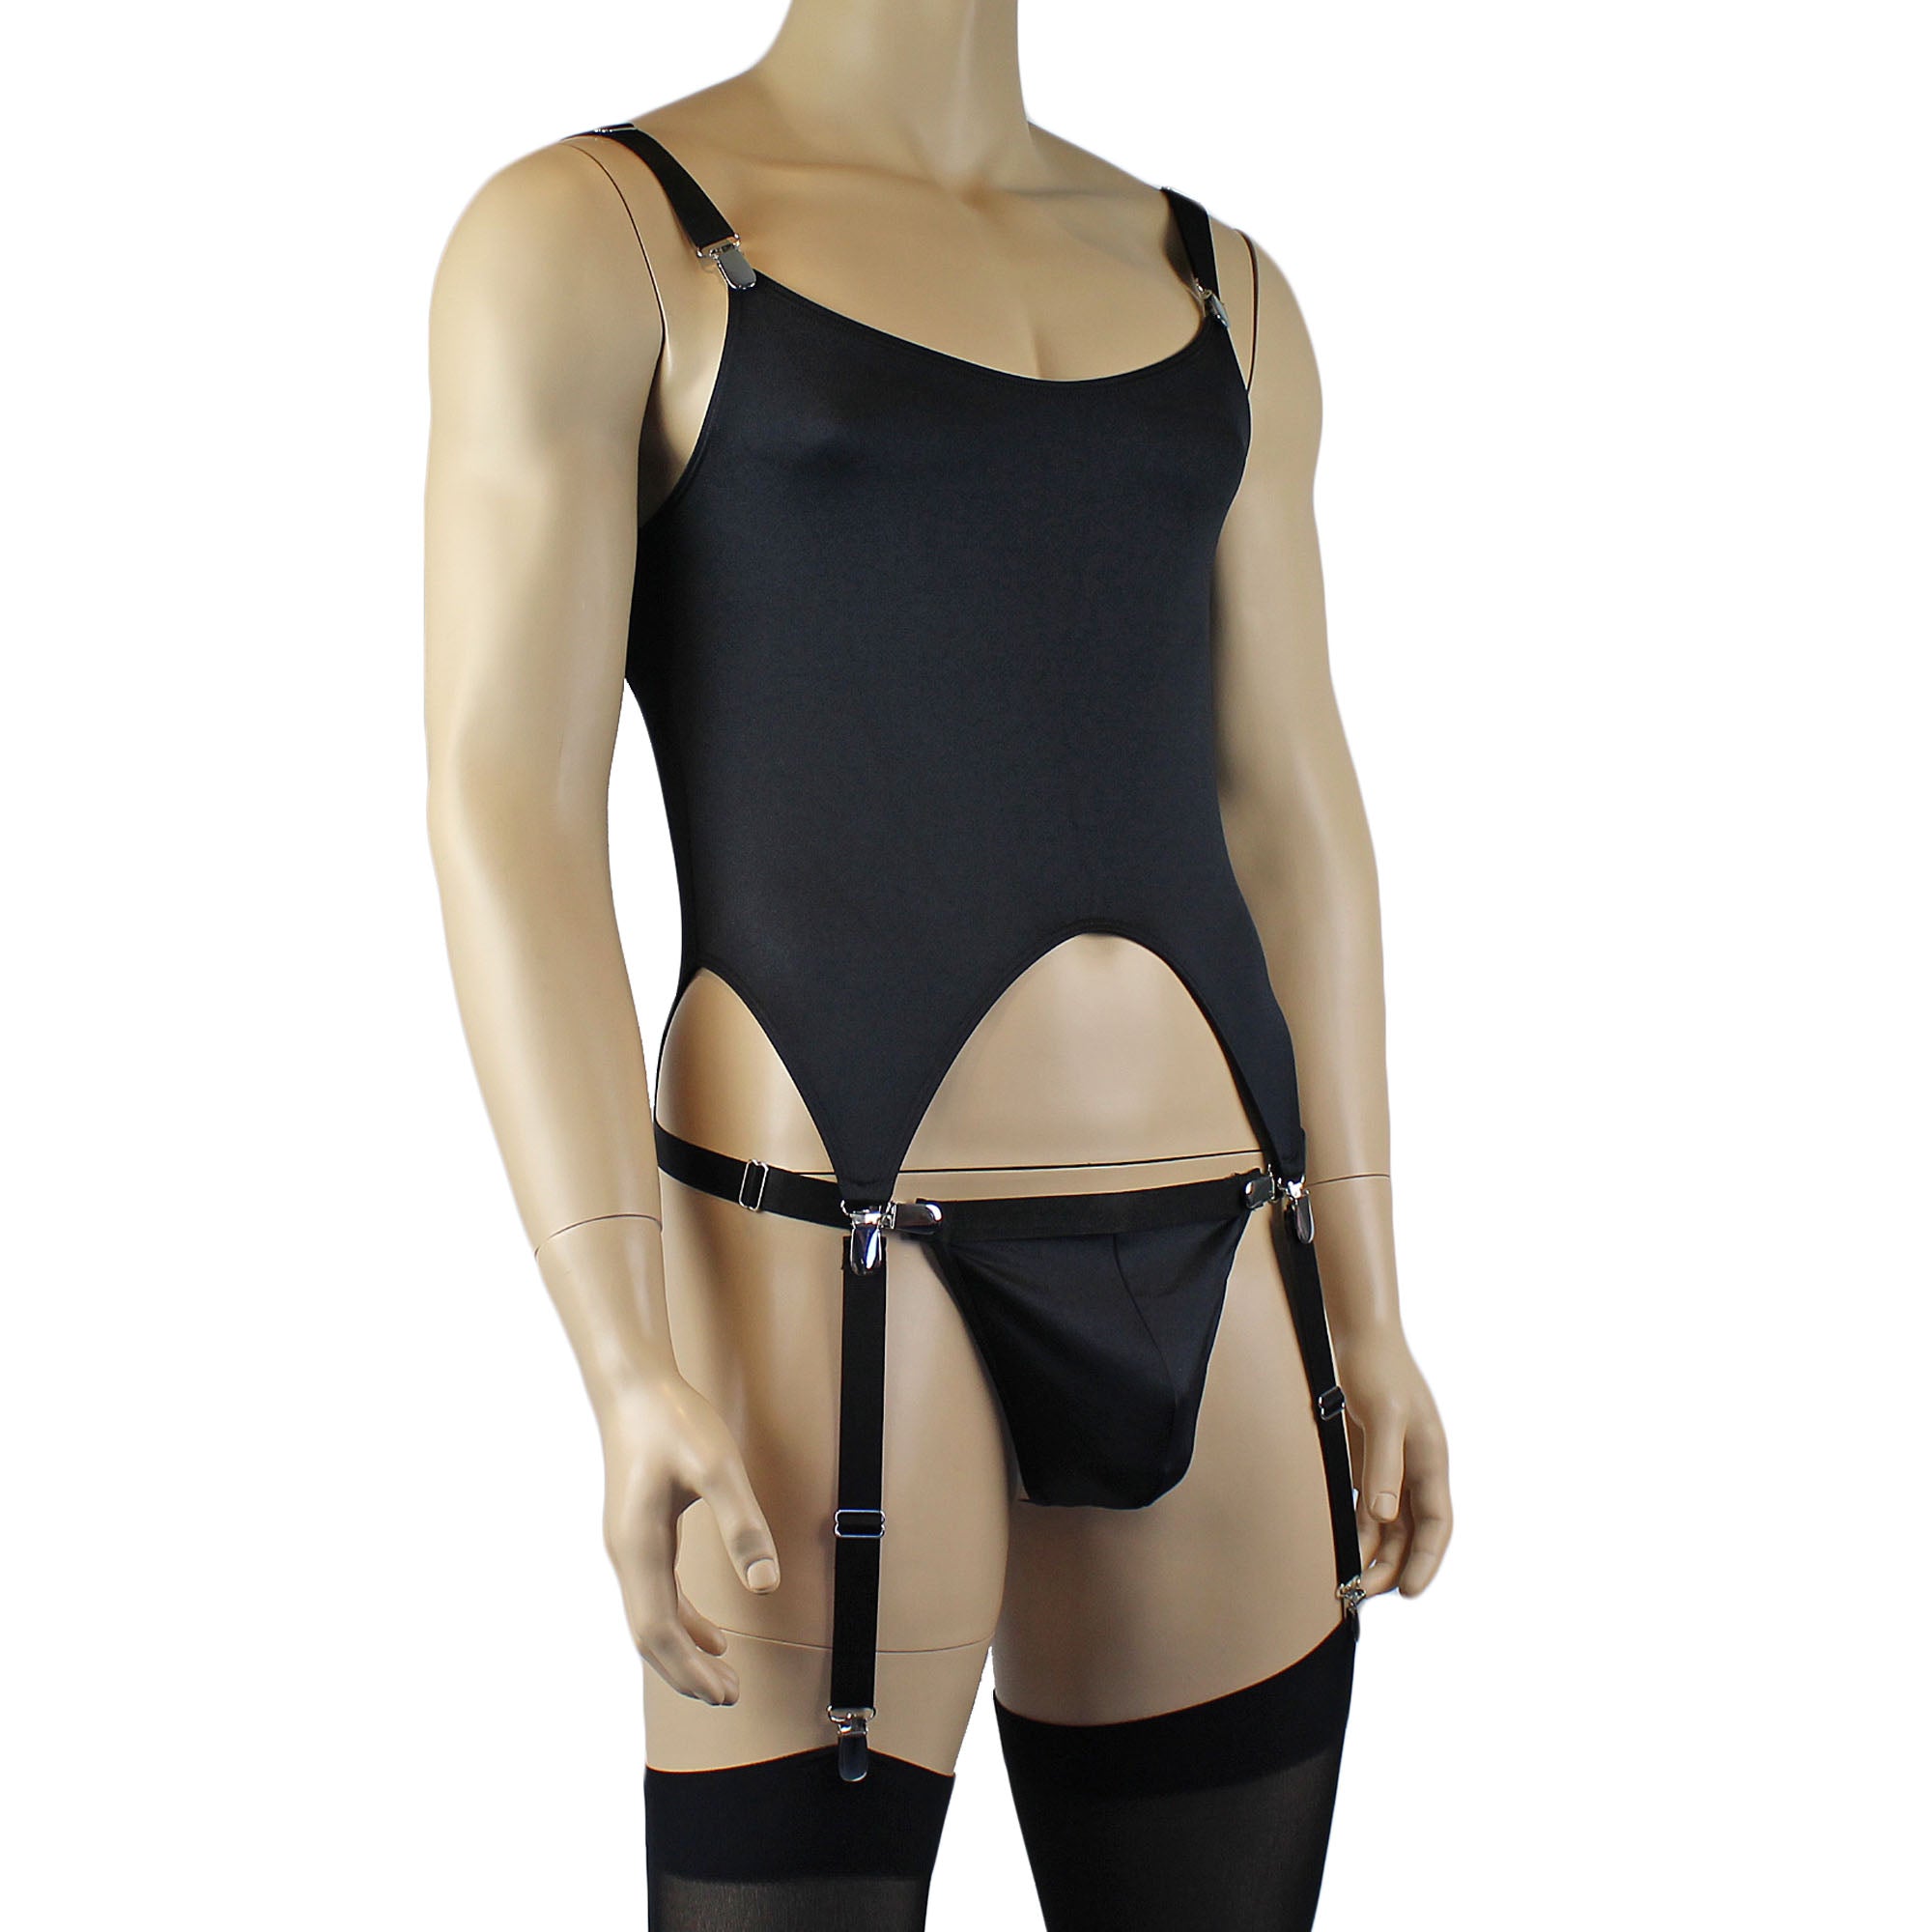 Mens Janice Corset Top, G string, Detachable Garters and Thigh High Stockings - Sizes up to 3XL